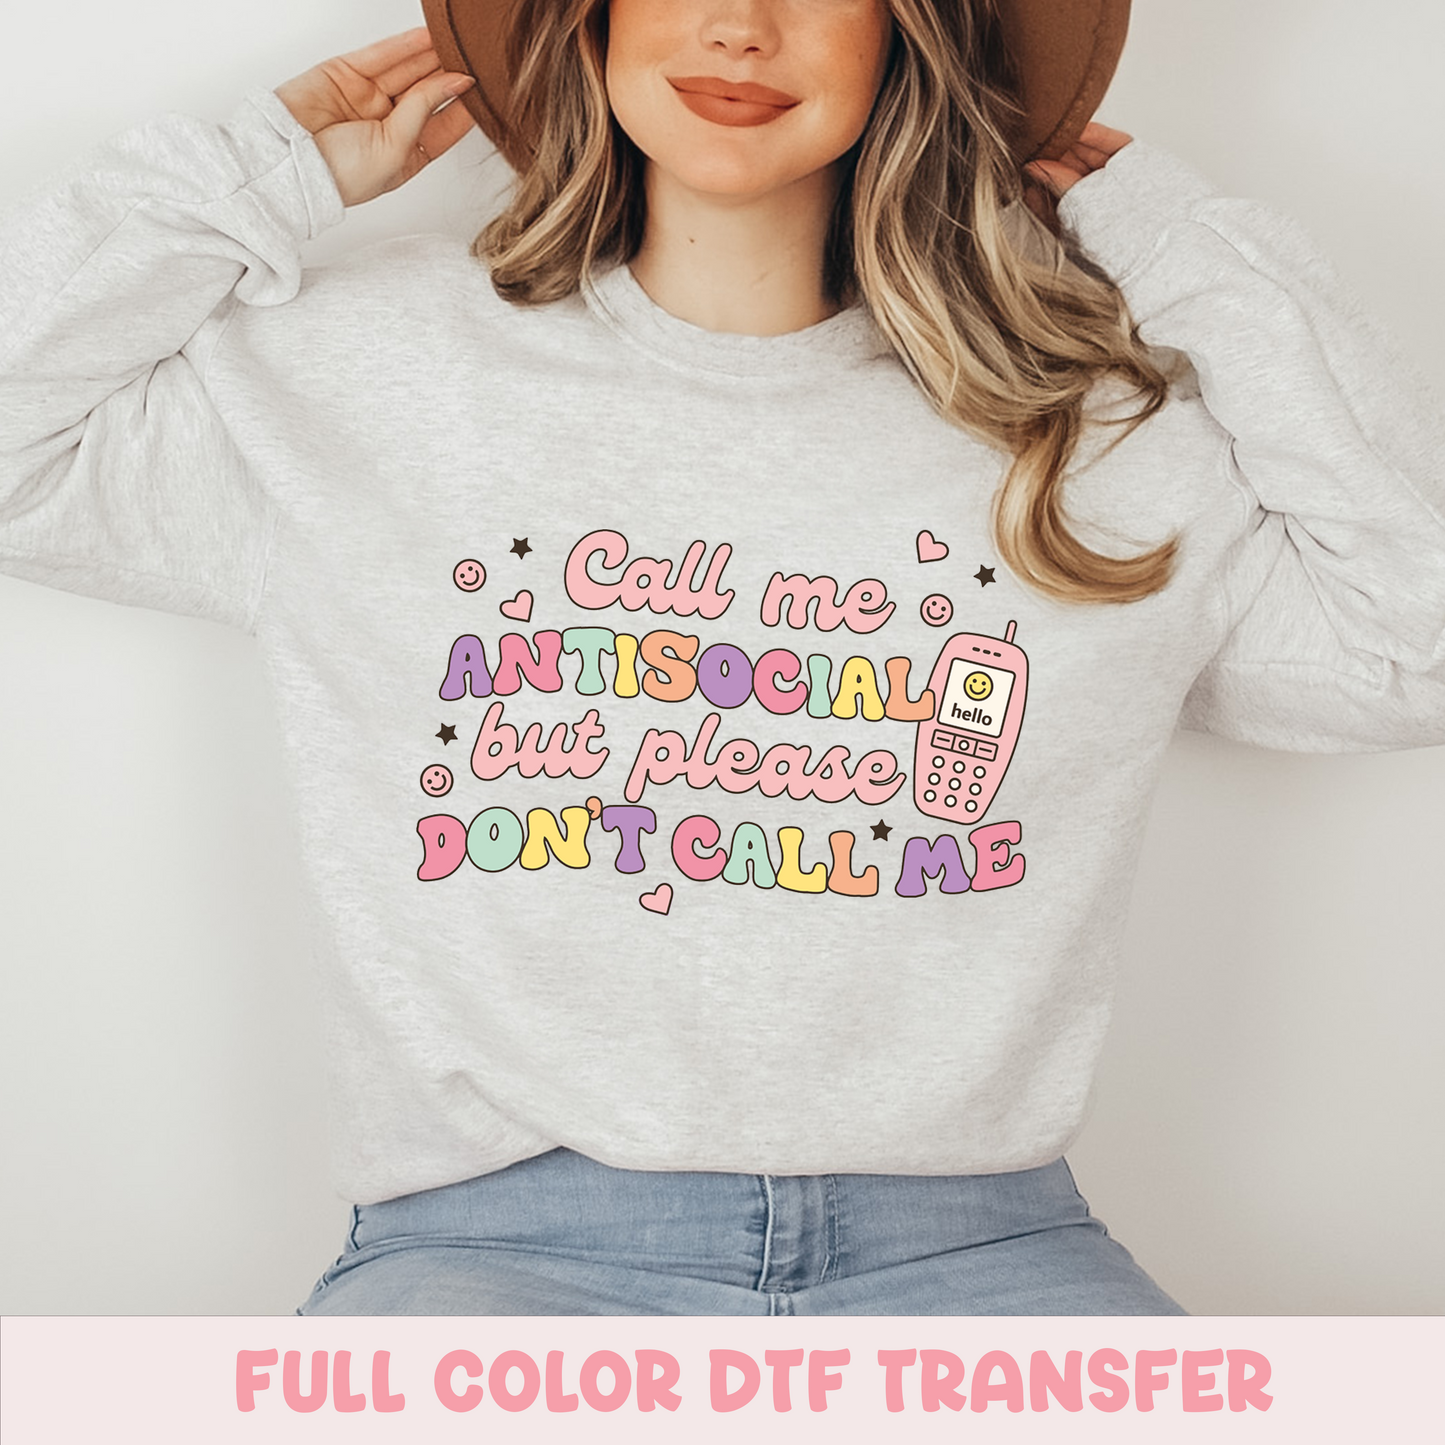 Call me Antisocial but Please don't call me - FULL COLOR DTF TRANSFER (Ready to Ship)